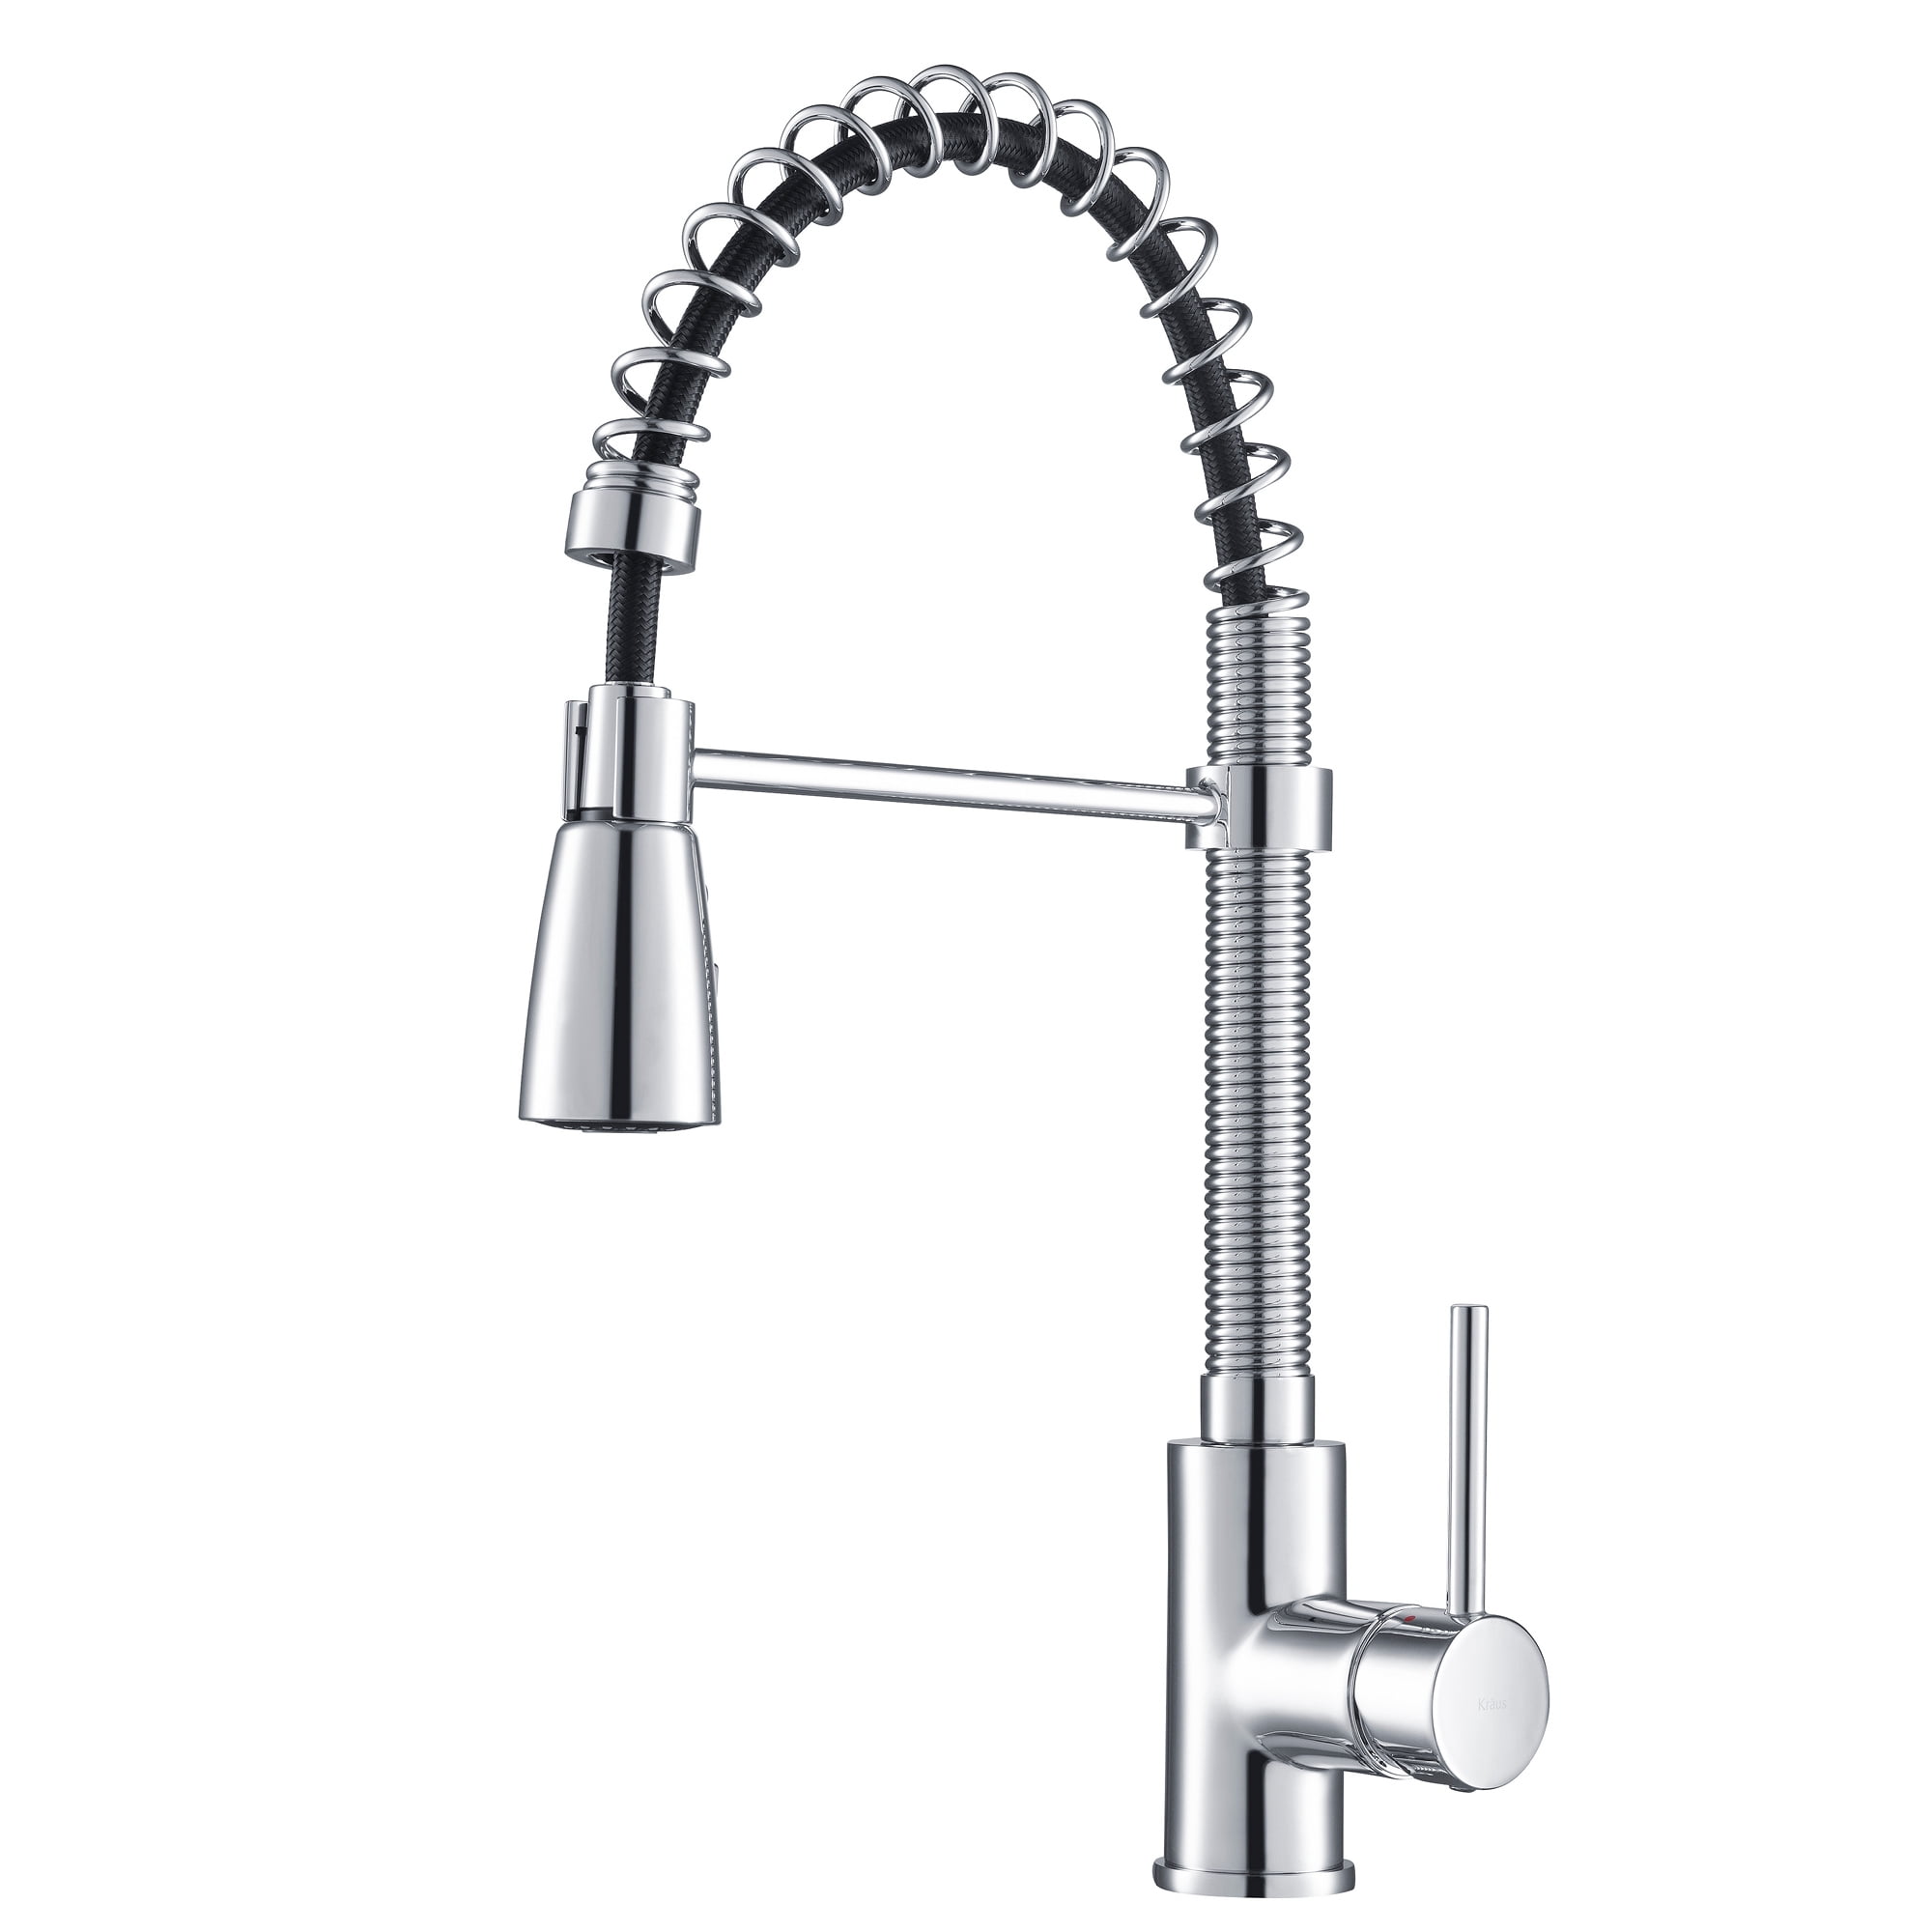 Kraus Commercial Style Kitchen Faucet With Spring Spout And 3 Function Pull Down Sprayer